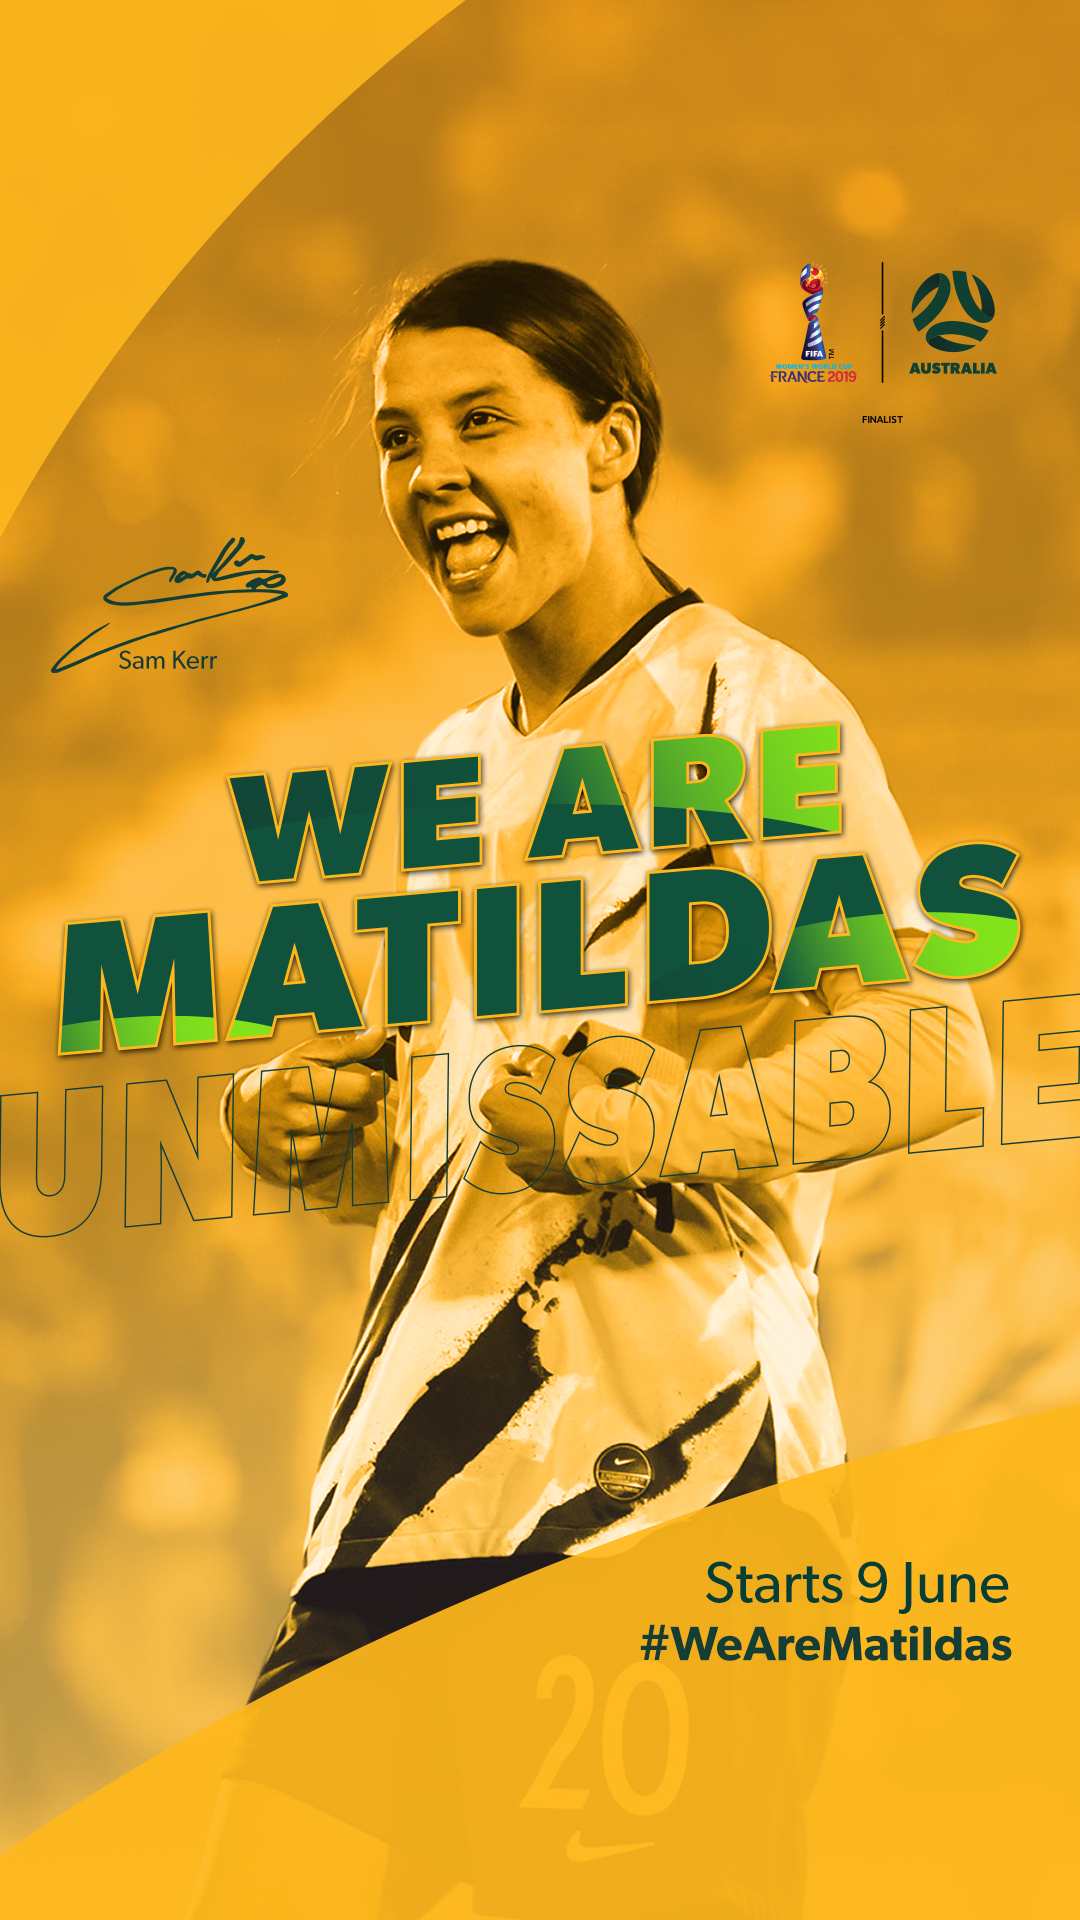 Support the Matildas with special 'We Are Matildas' phone